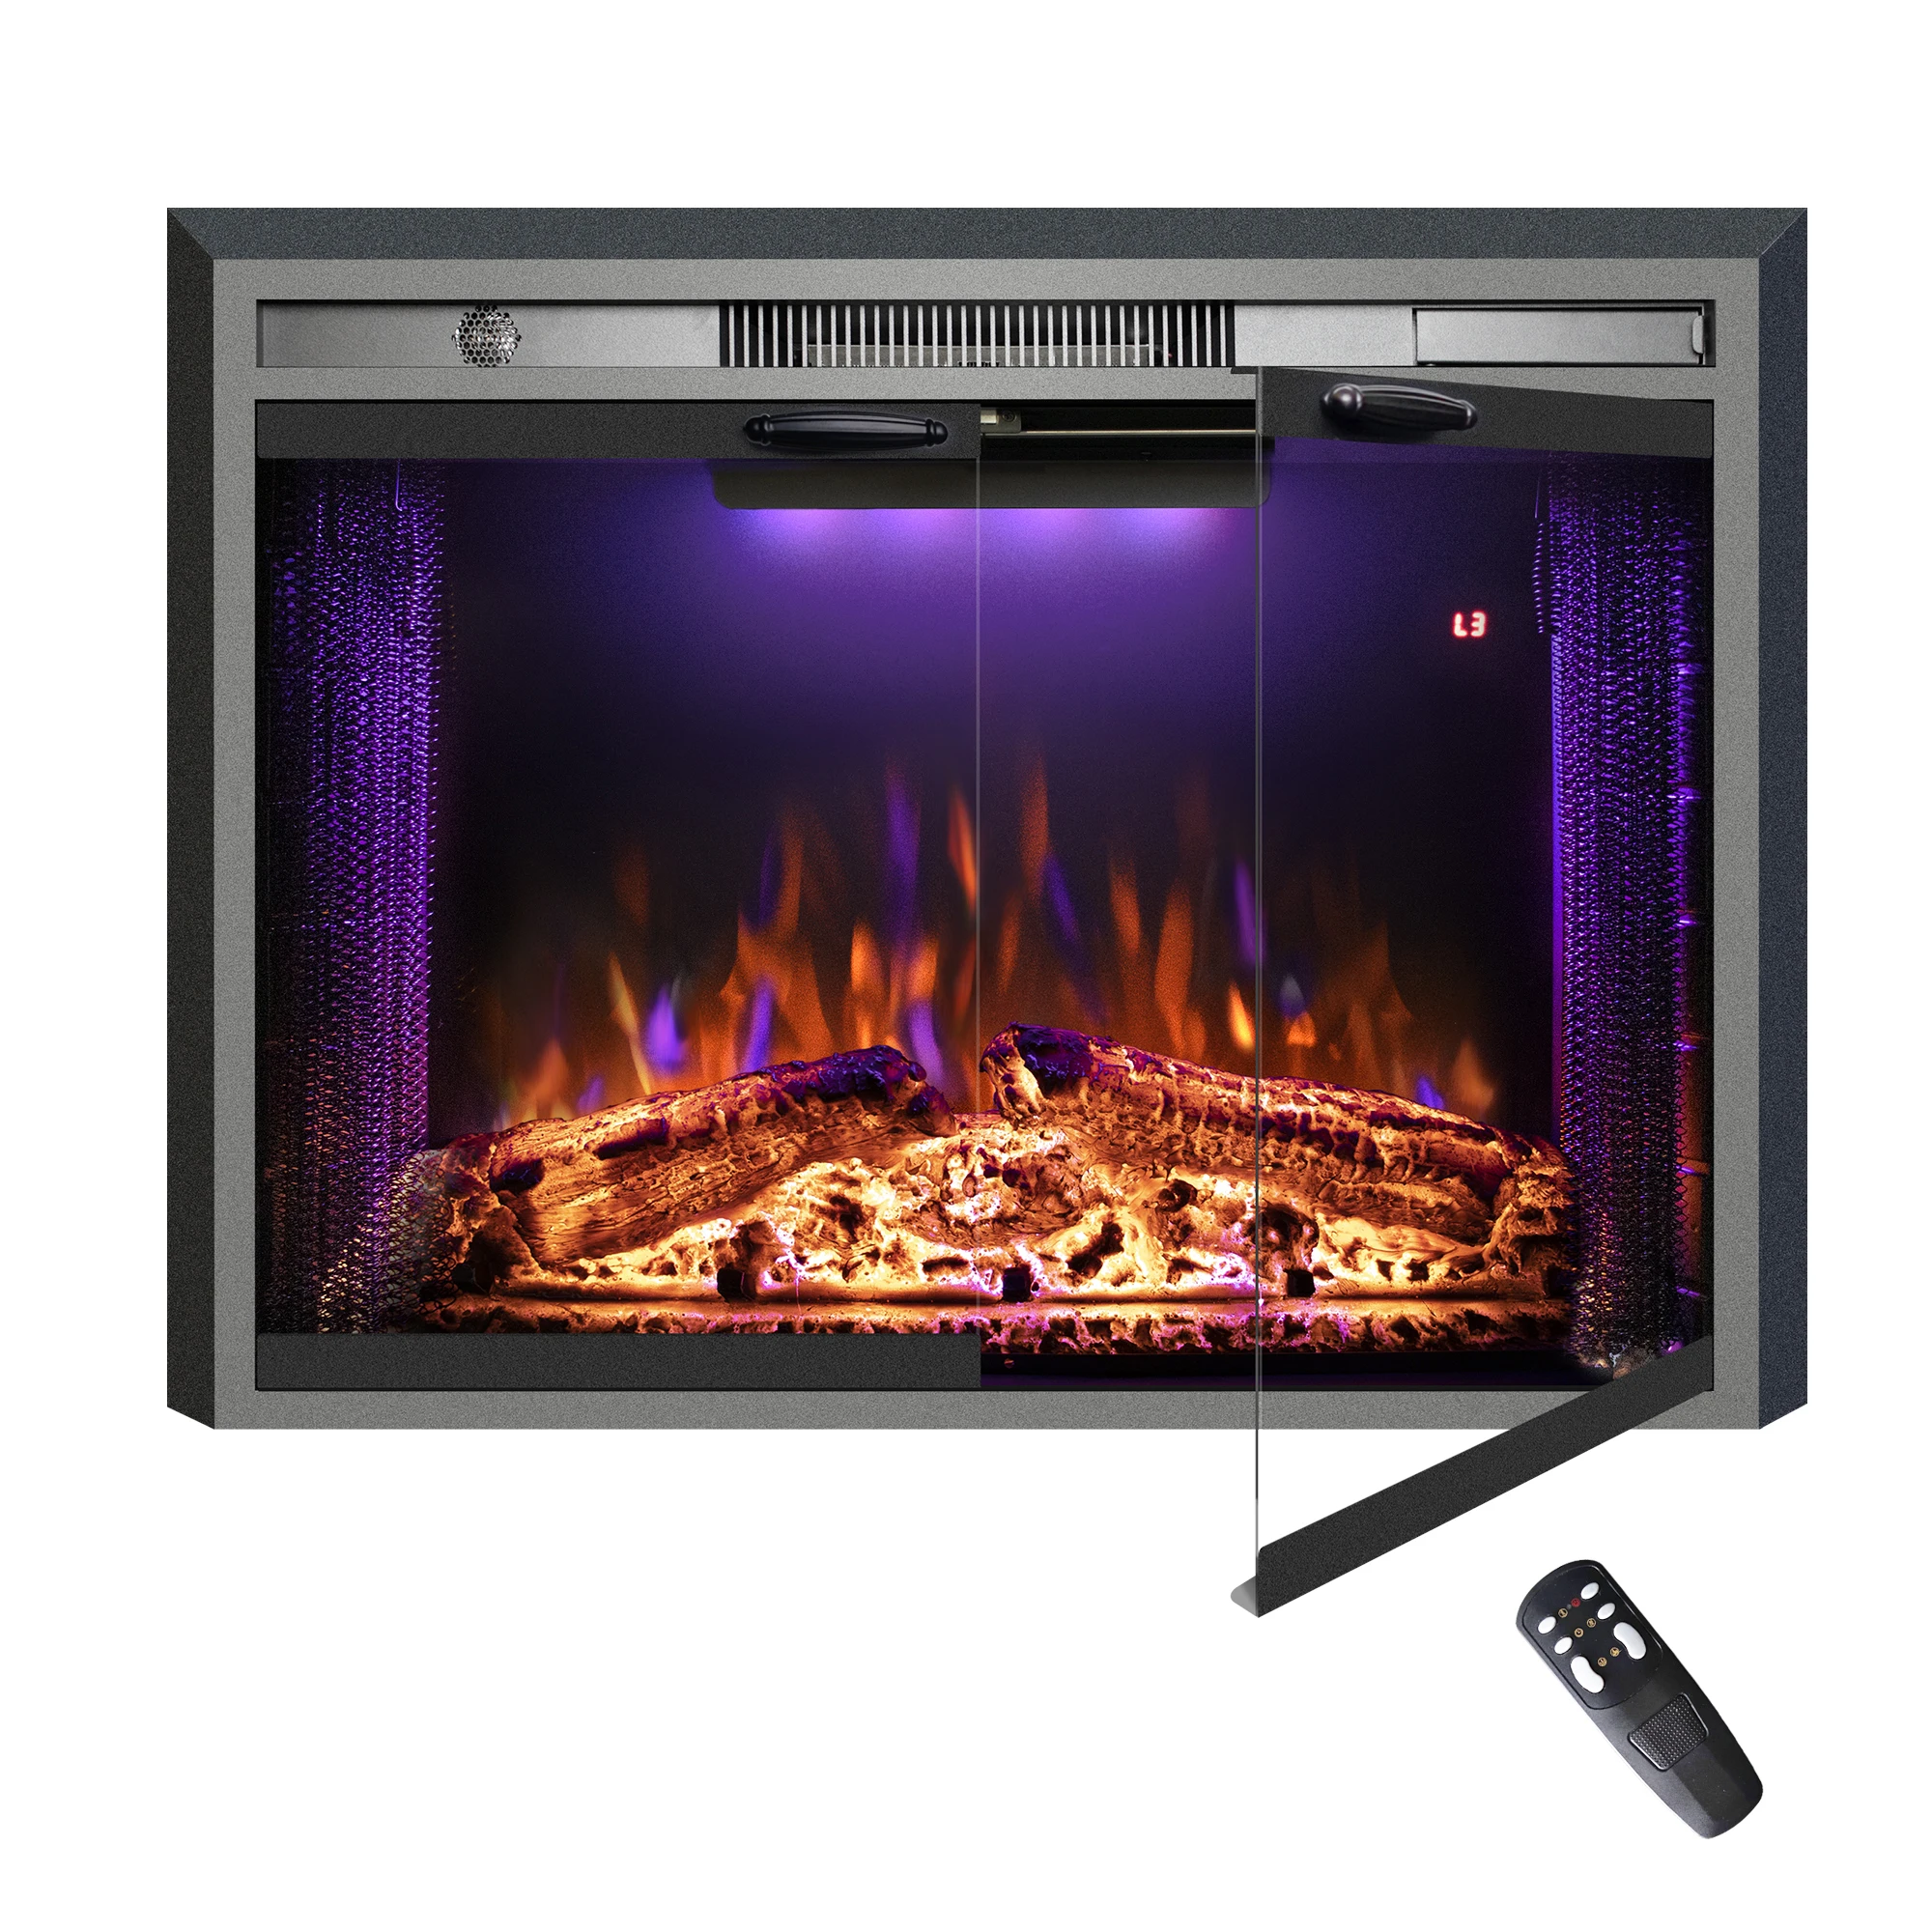 Luxstar Manufacture Home electric fireplace insert Heaters 3 Colors Flame Option with Real Log Burning Effect